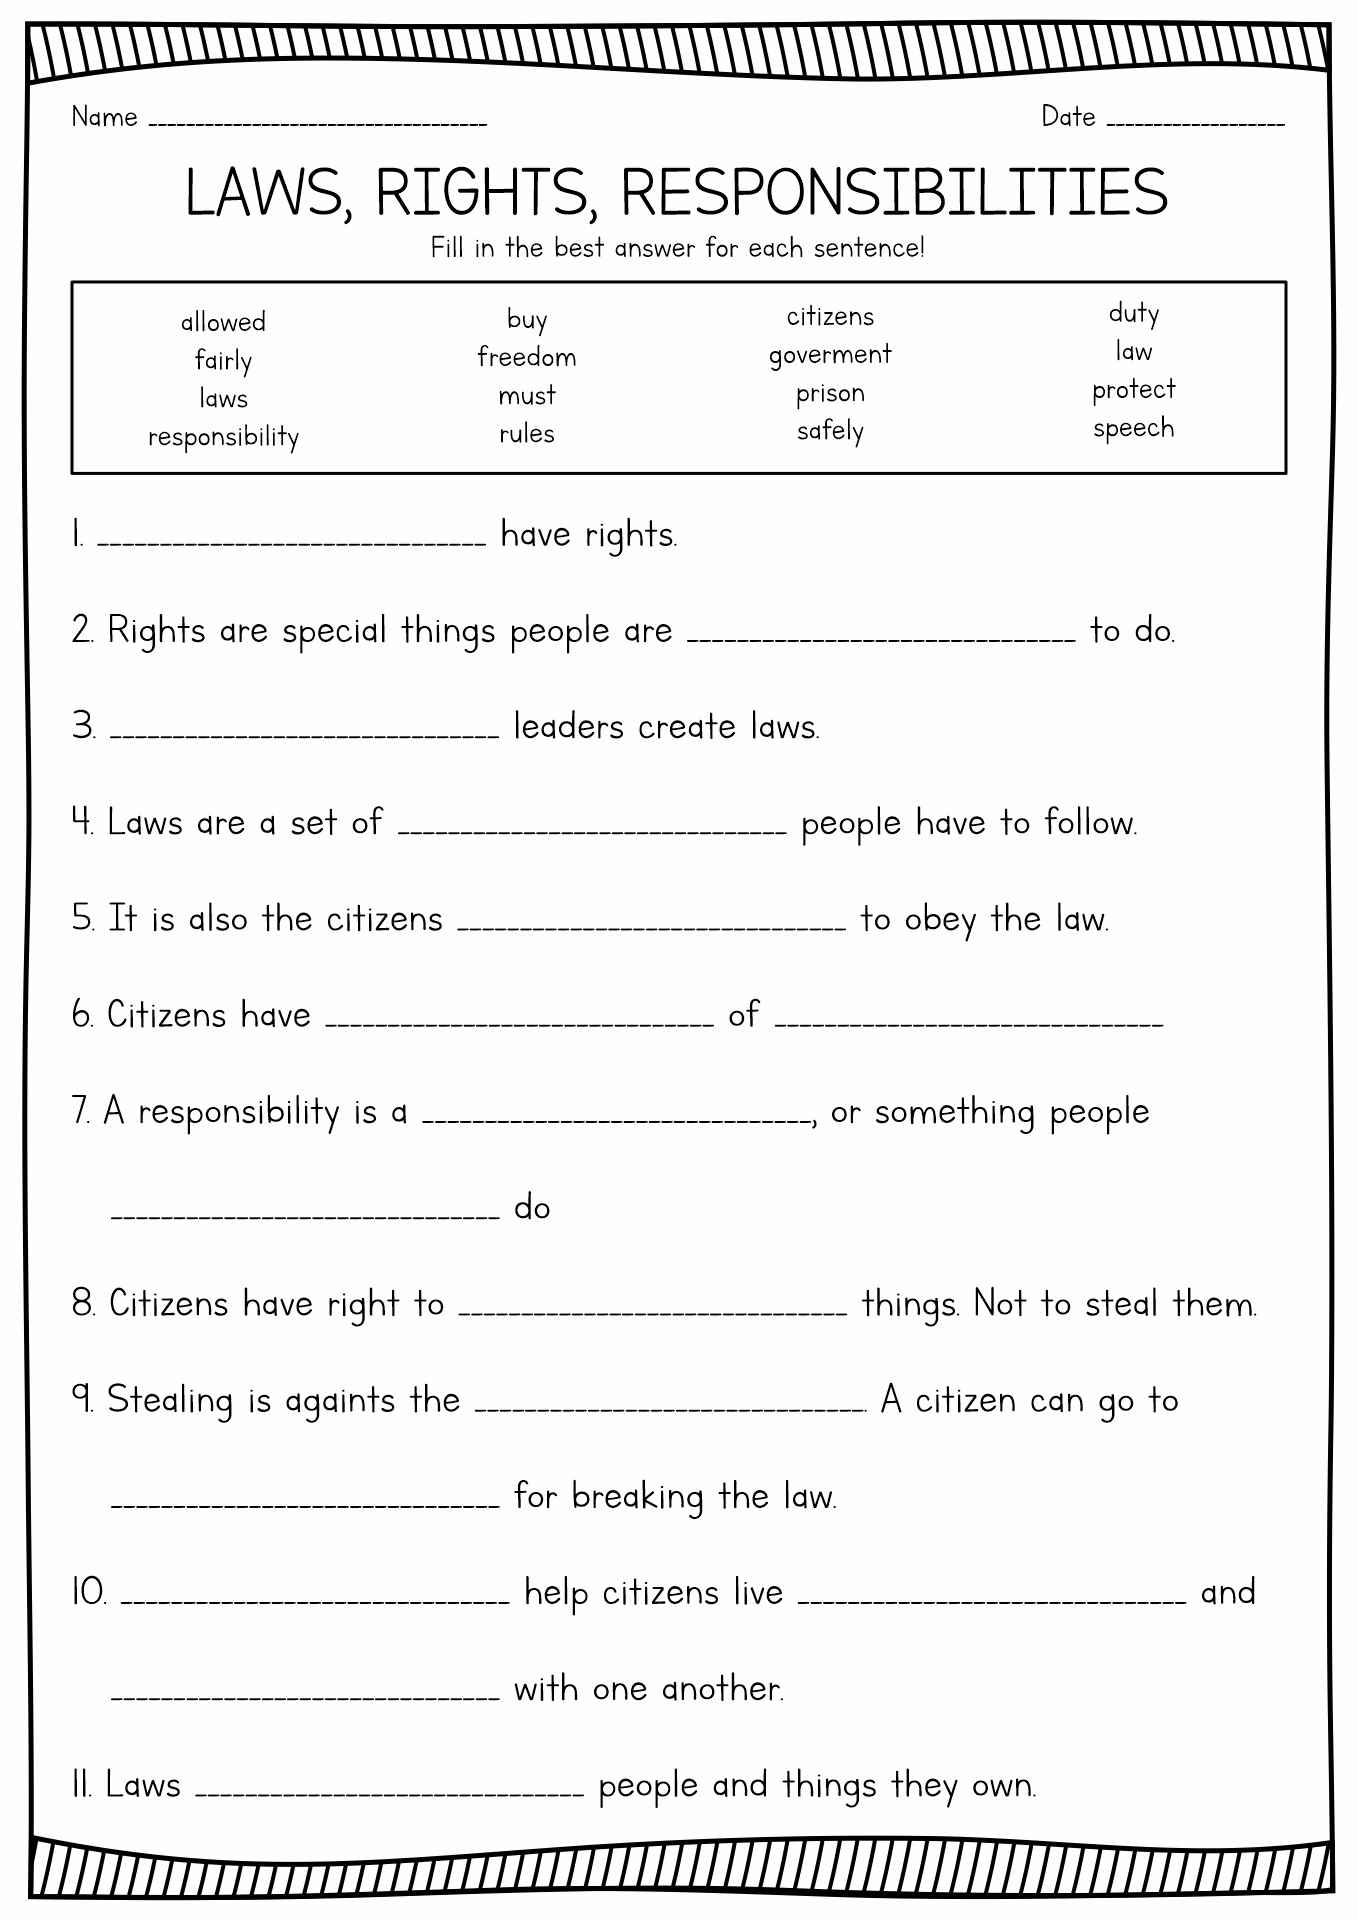 Citizen Rights and Responsibilities Worksheet Image